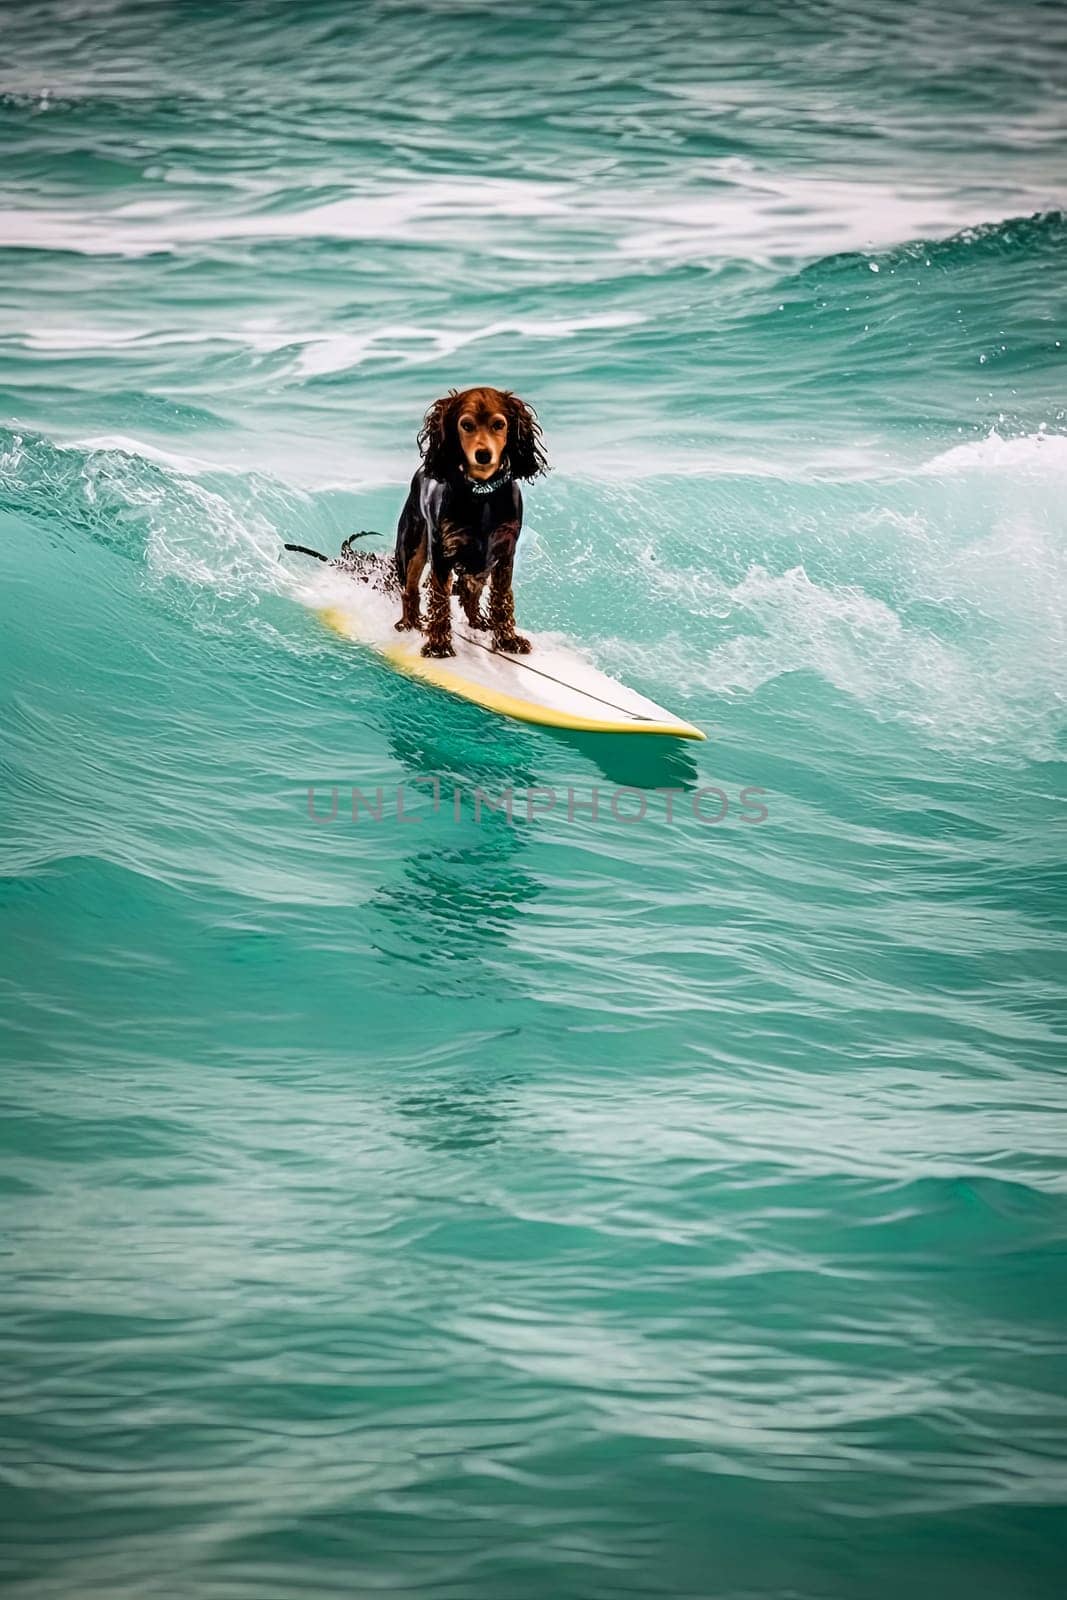 A dog is surfing on a surfboard in the ocean. The dog is wearing a pink shirt and he is enjoying the ride